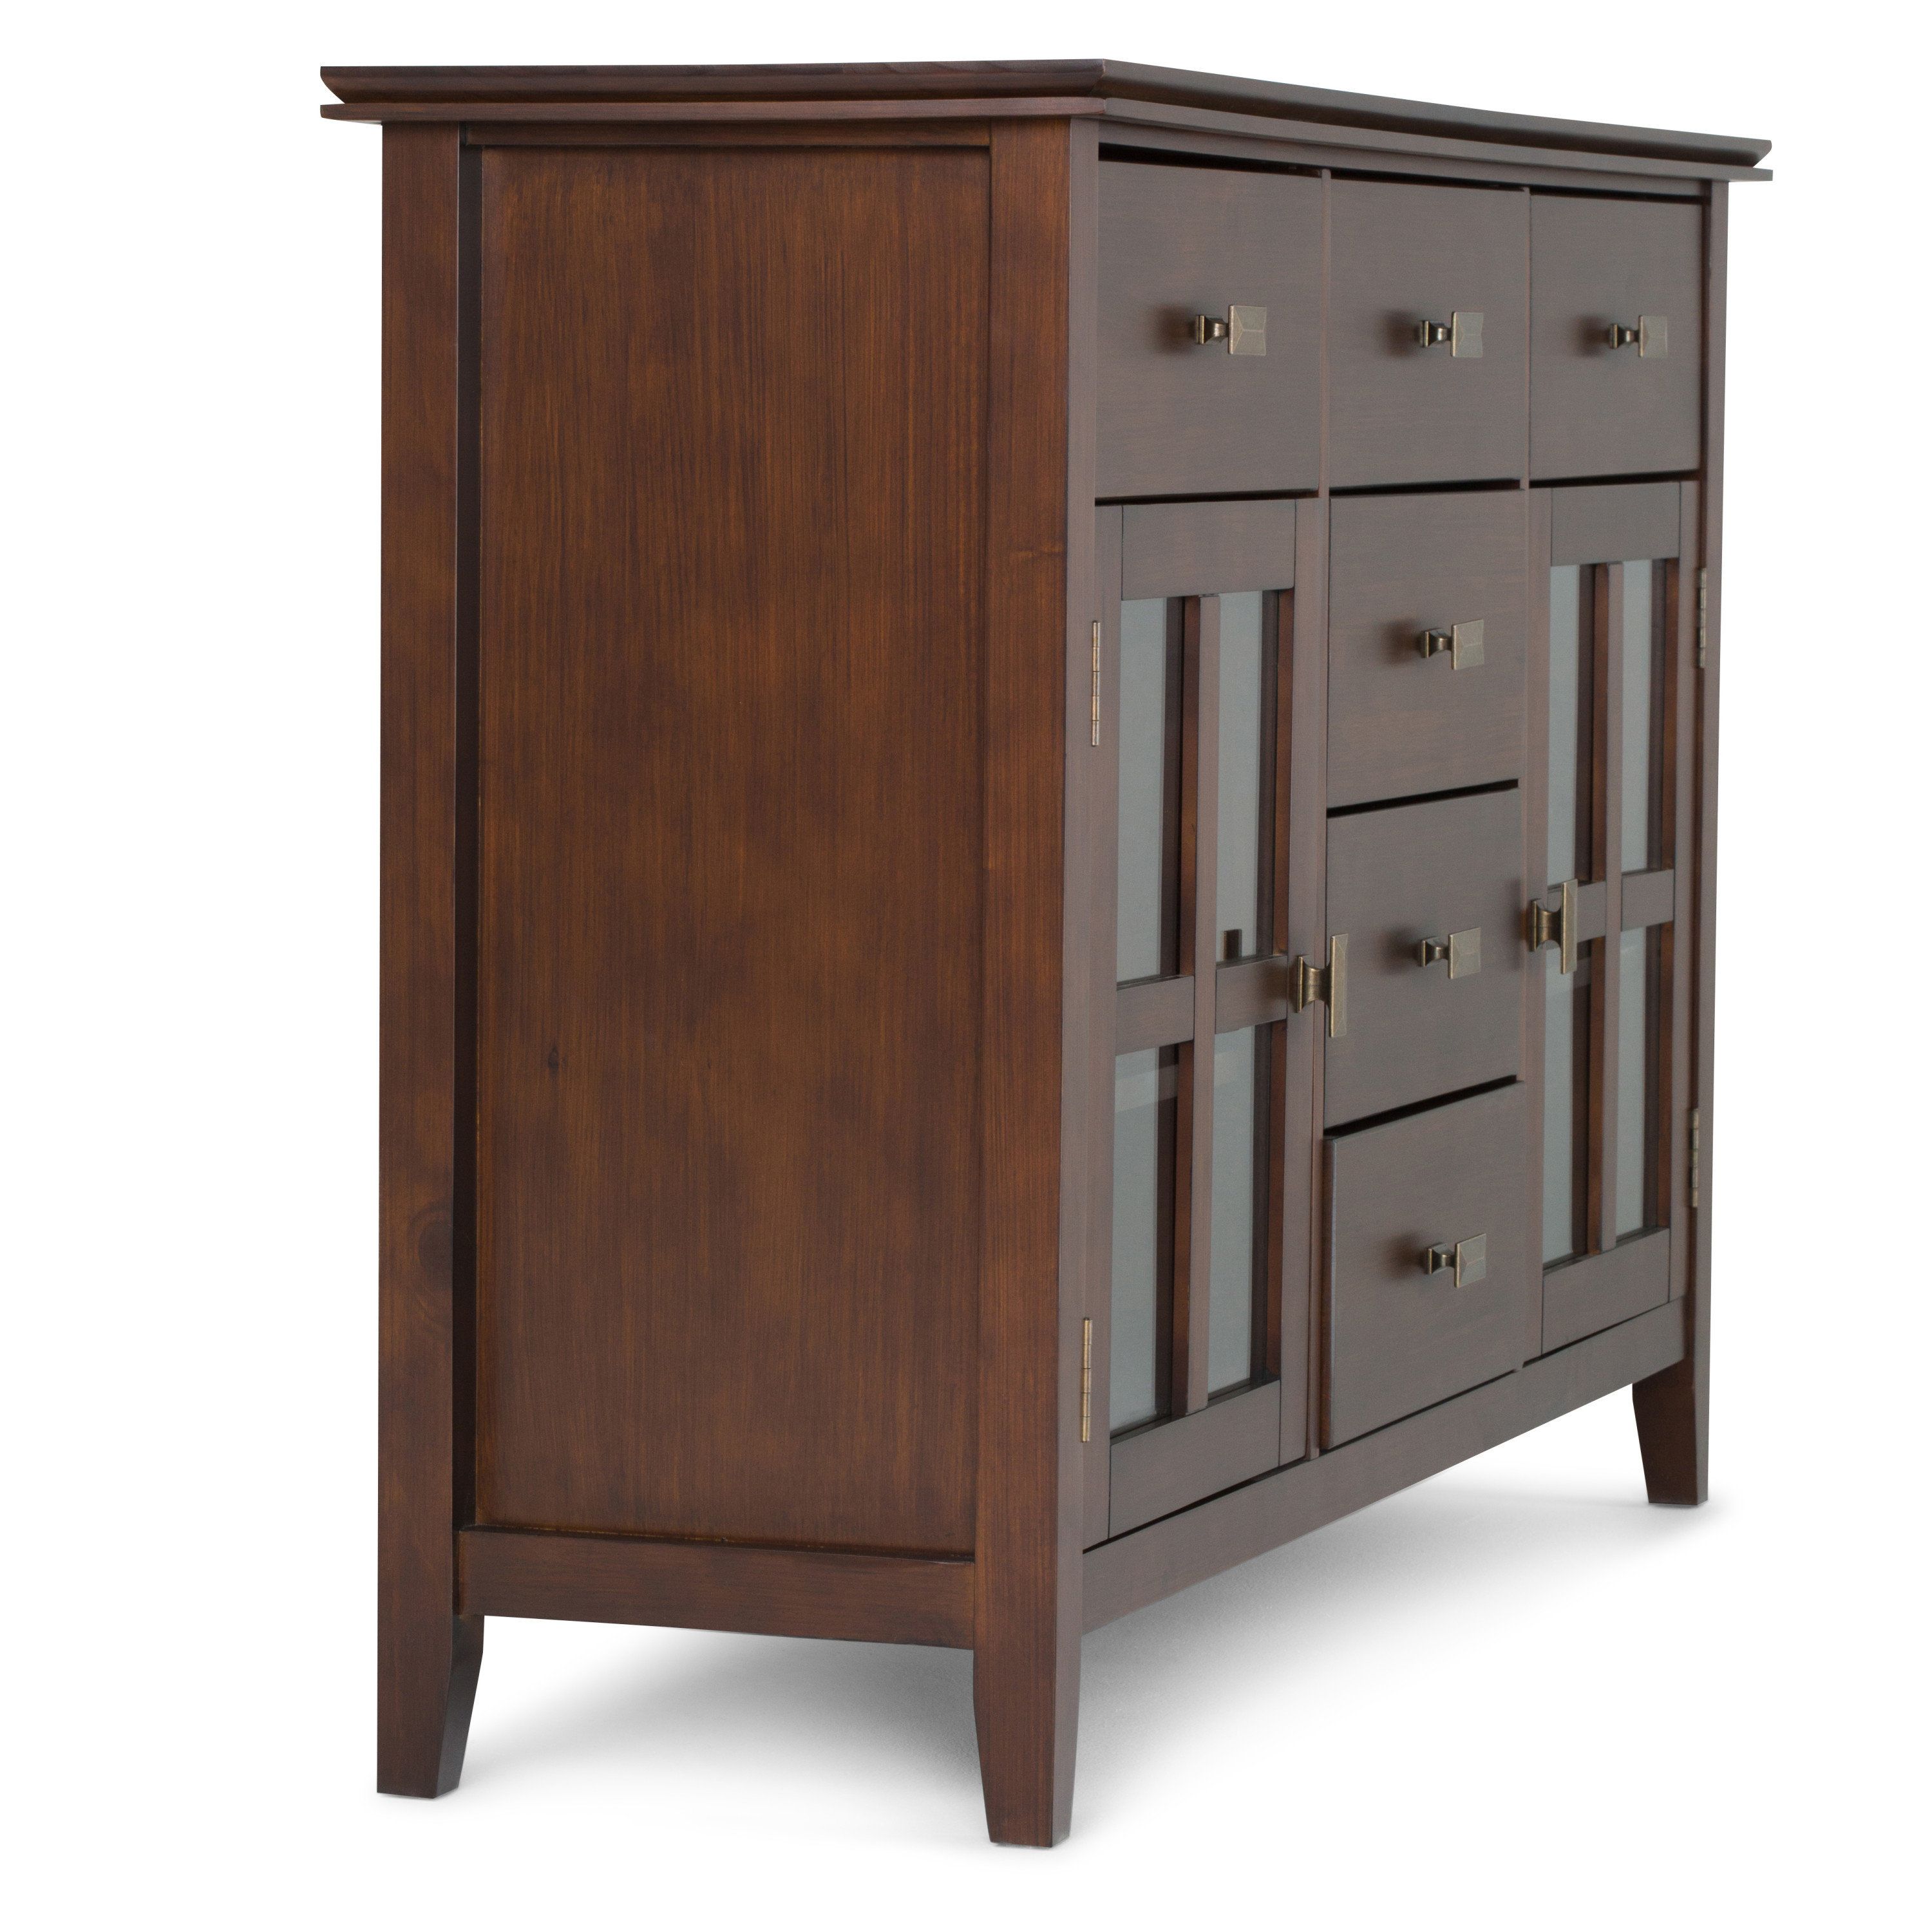 Gosport Sideboard Throughout Most Popular Whitten Sideboards (View 14 of 20)